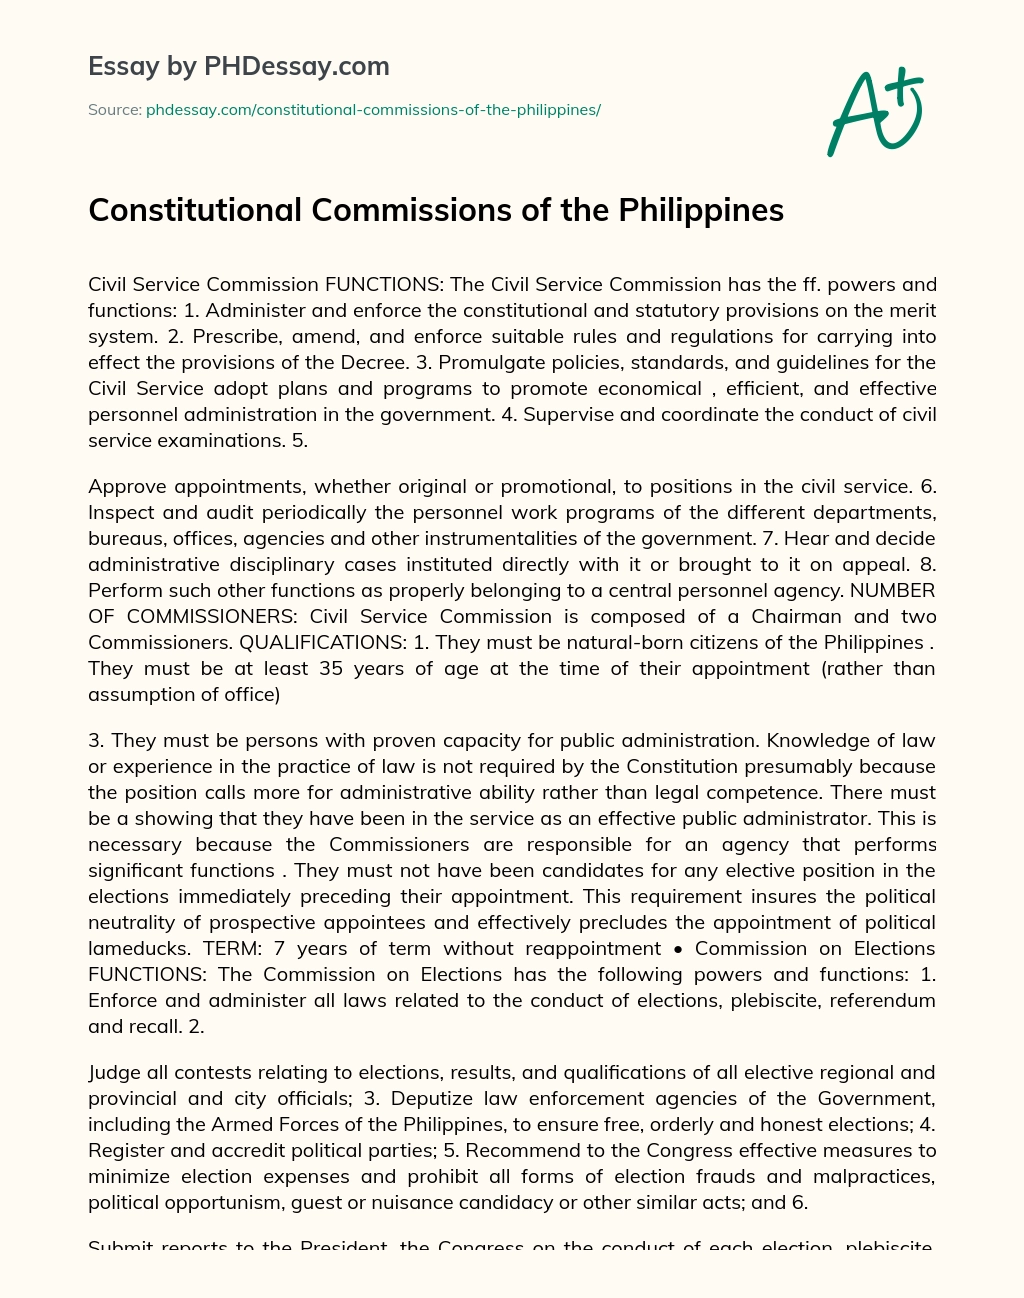 Constitutional Commissions of the Philippines essay